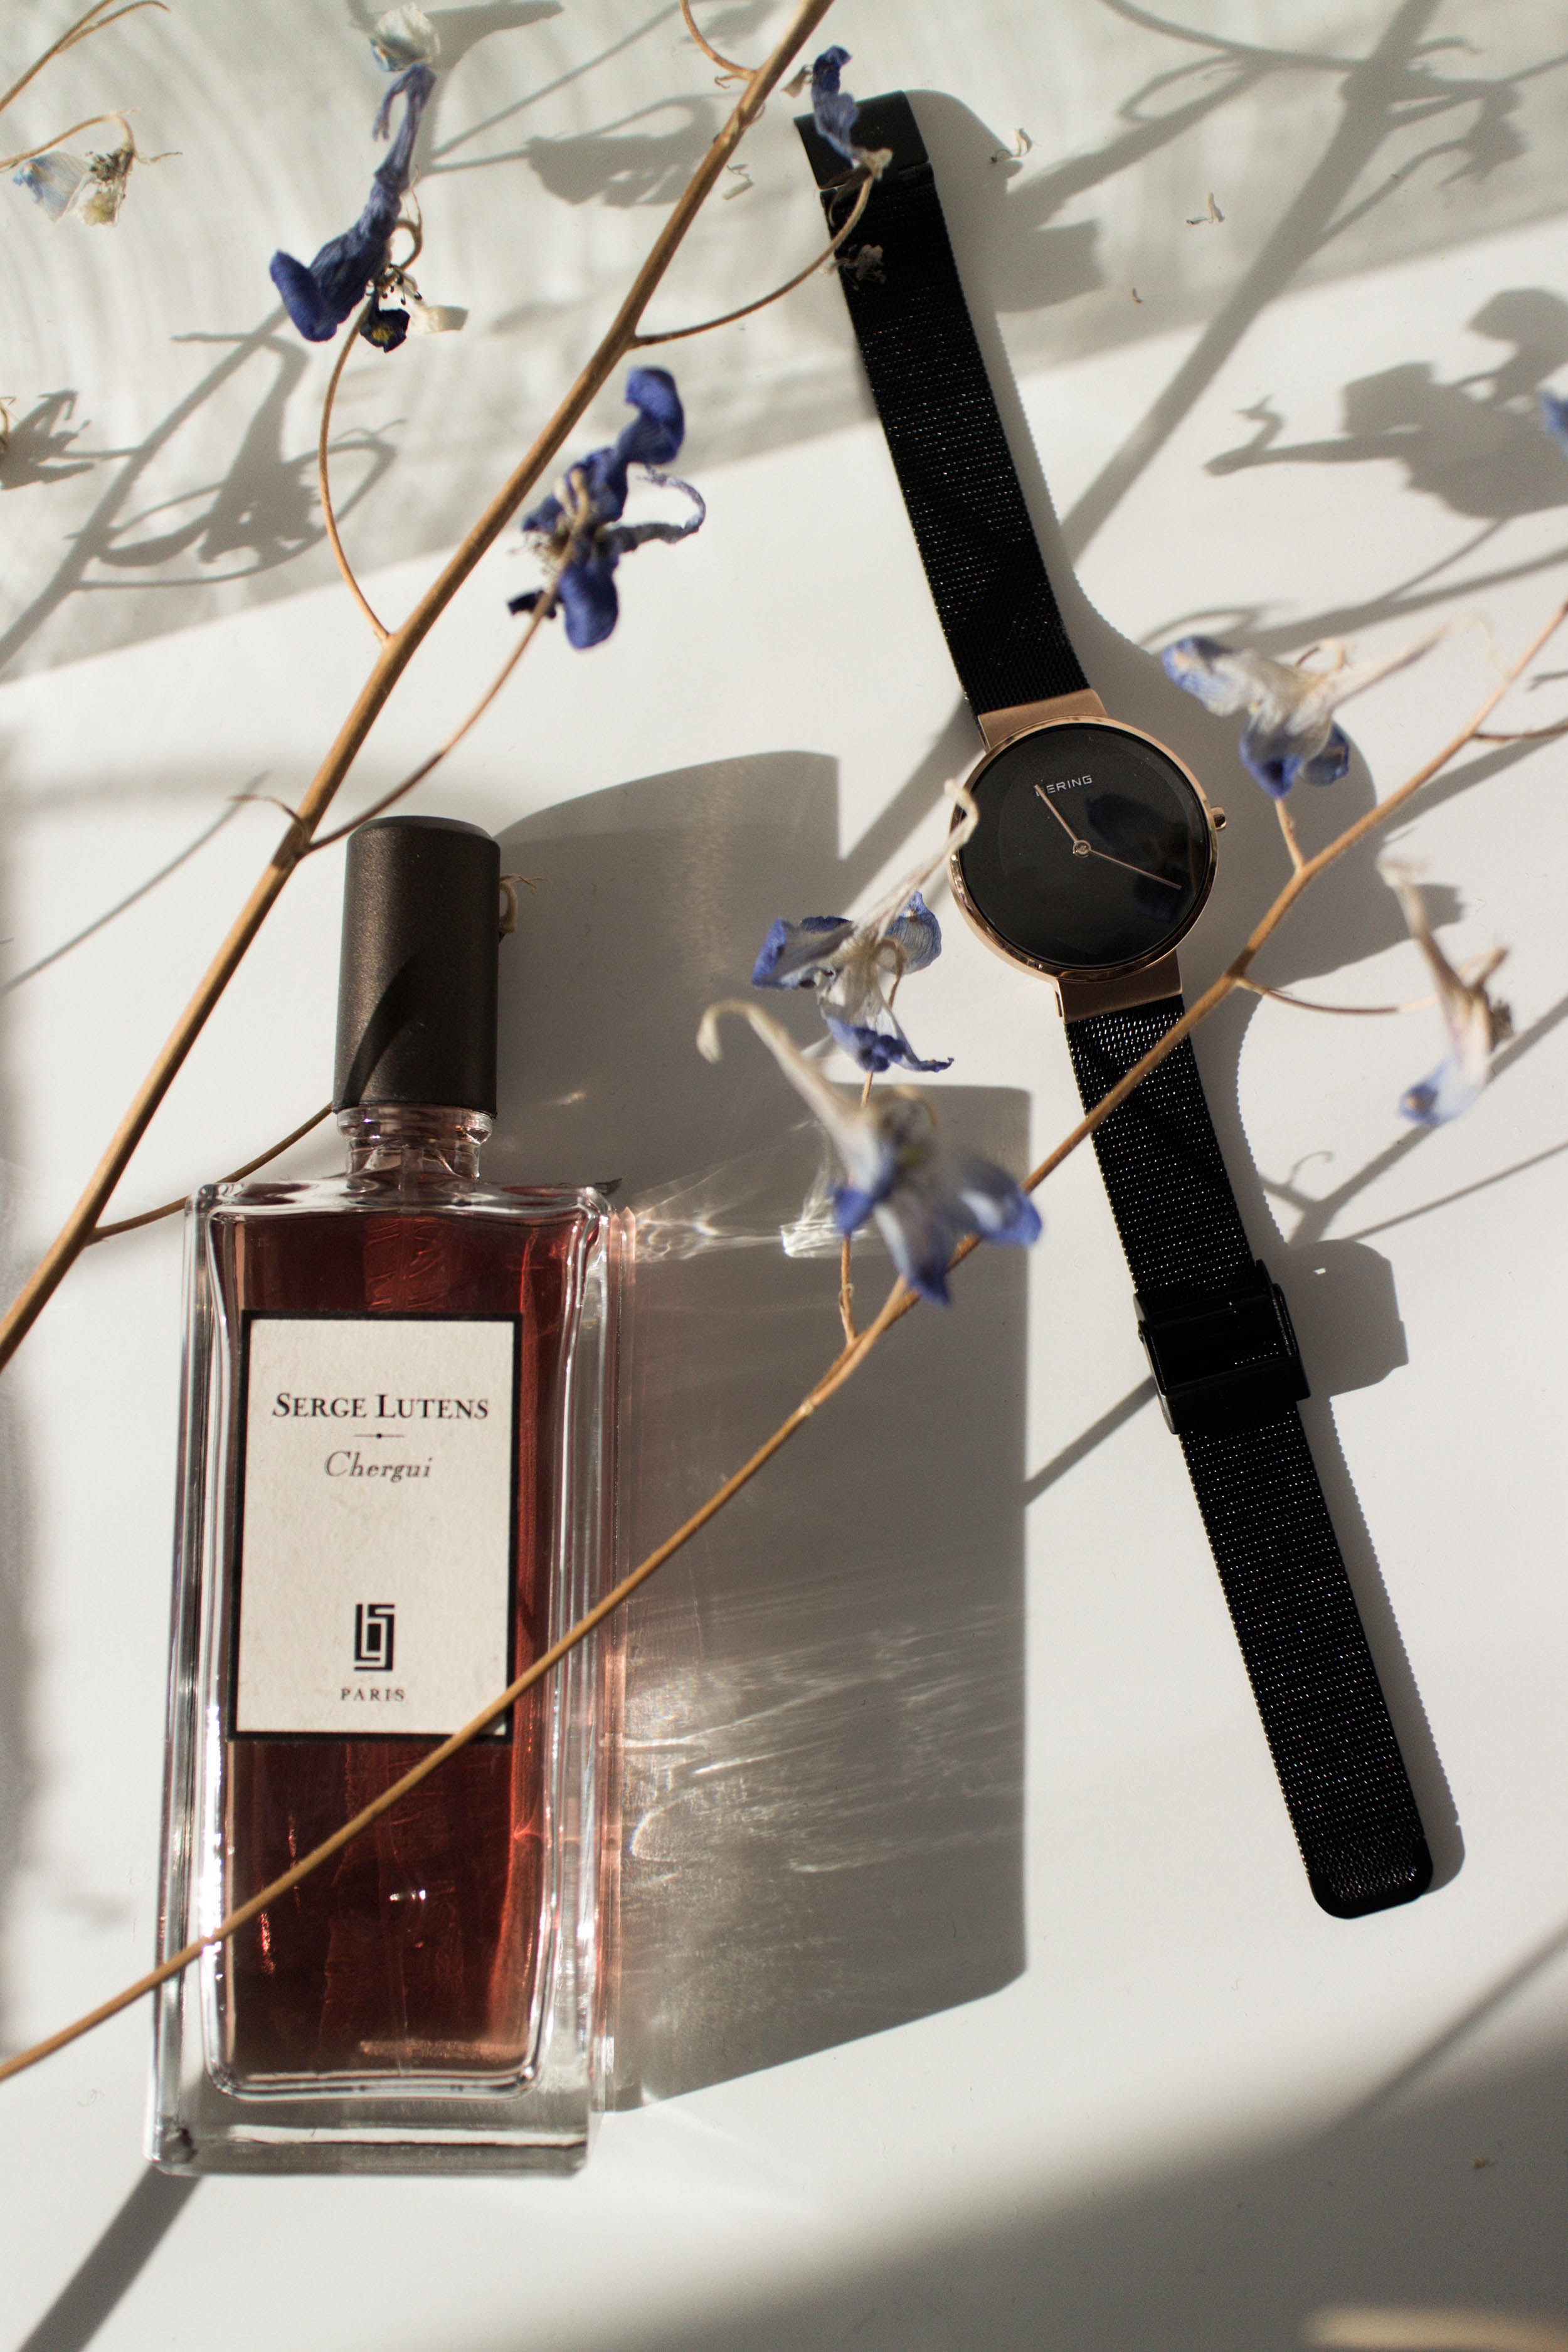 IHEARTALICE.DE - Fashion, Travel, Lifestyle & Beauty-Blog by Alice M. Huynh from Berlin/Germany: Bering Milanaise Watch, Serge Lutens Chergui Fragrance / What's in my Bag? – Iceland